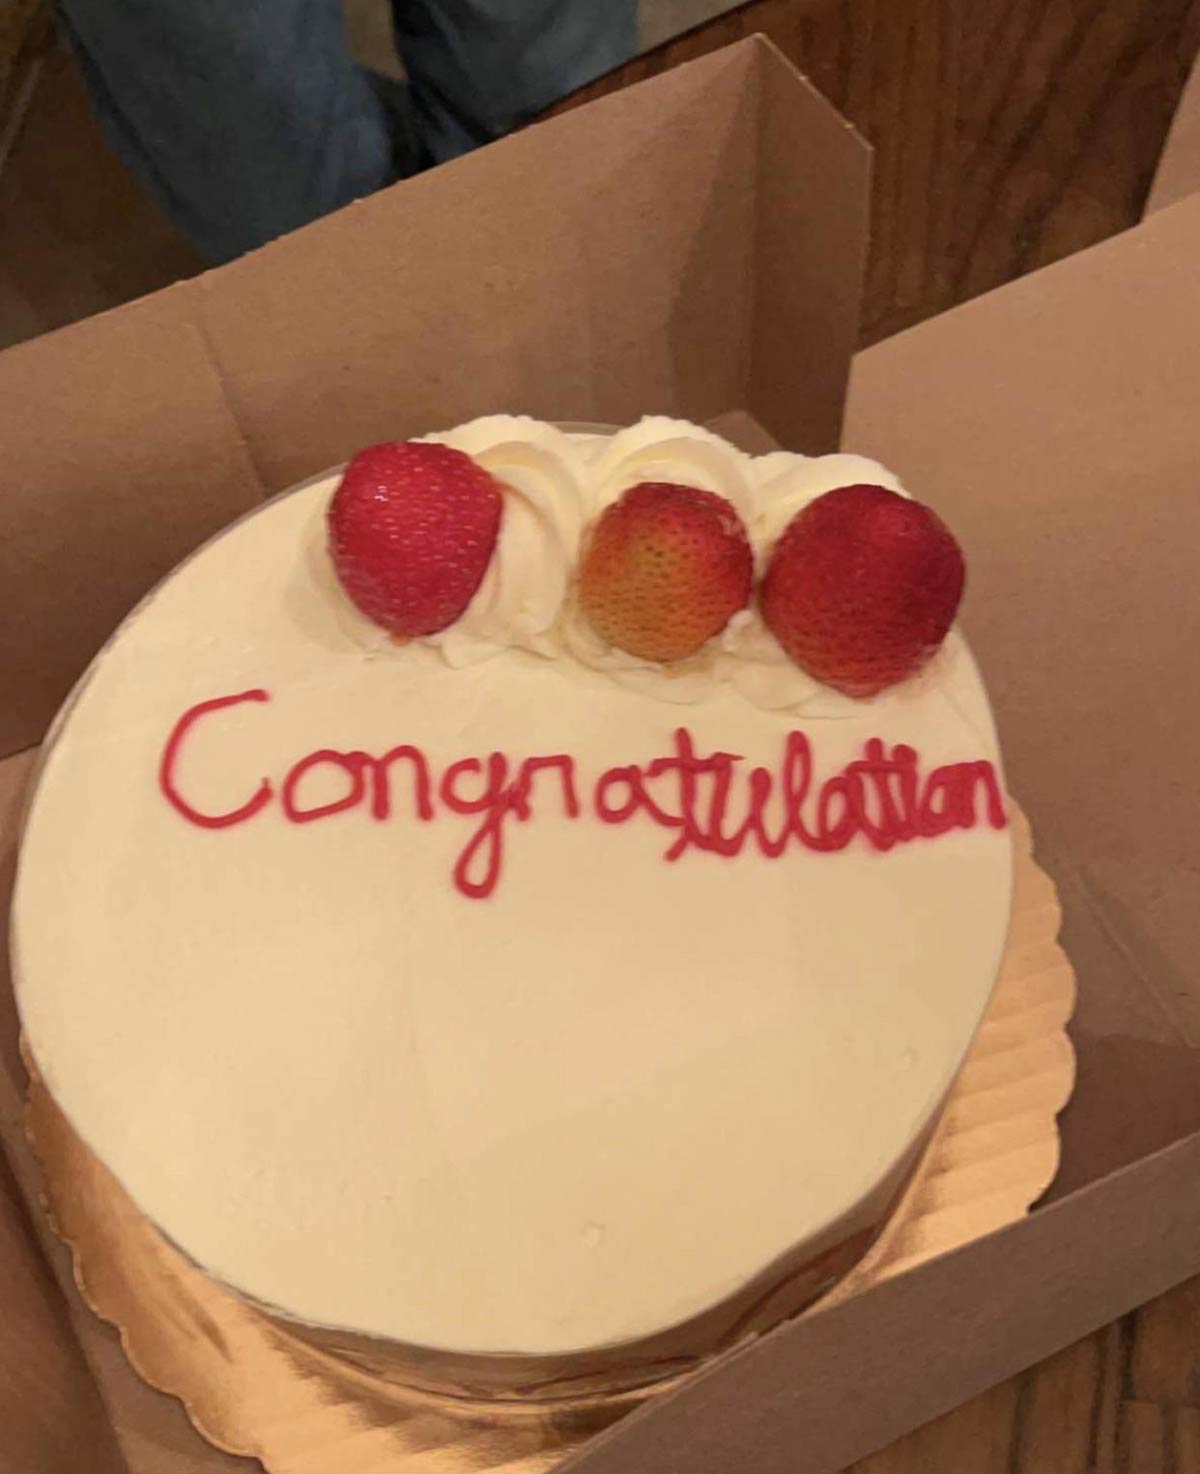 This “Congratulation” cake my wife and I were given a few years back. The Whole Foods employee ran out of space